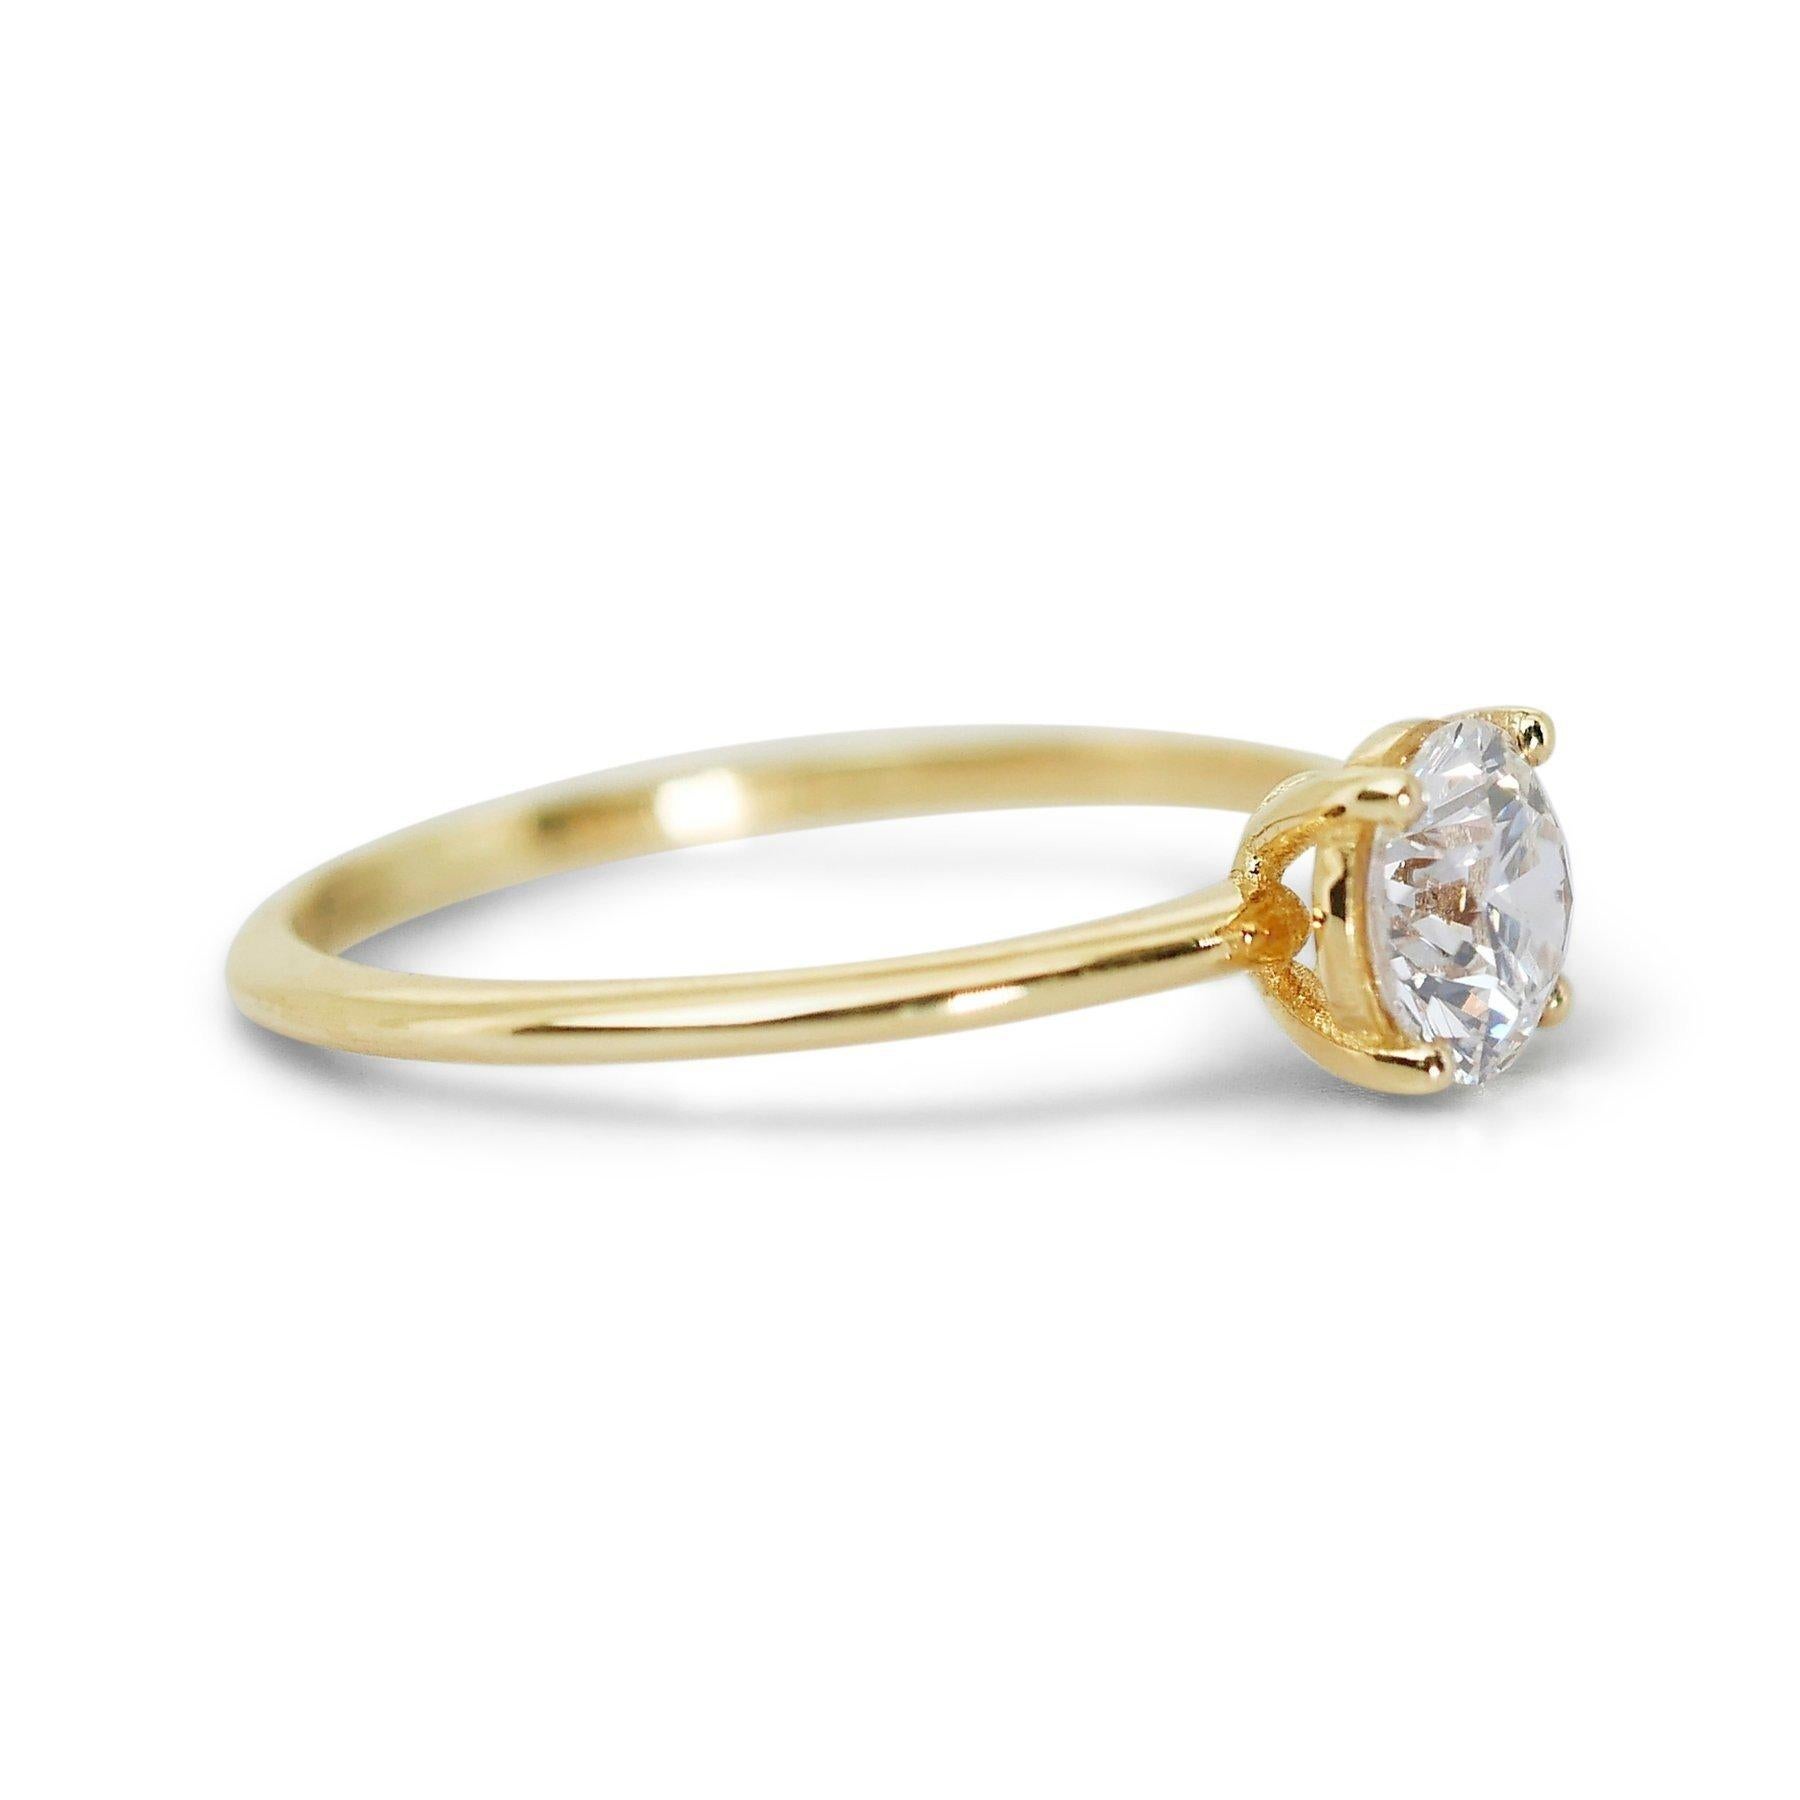 Round Cut Radiant 1.02ct Round Solitaire Diamond Ring in 18k Yellow Gold - GIA Certified For Sale